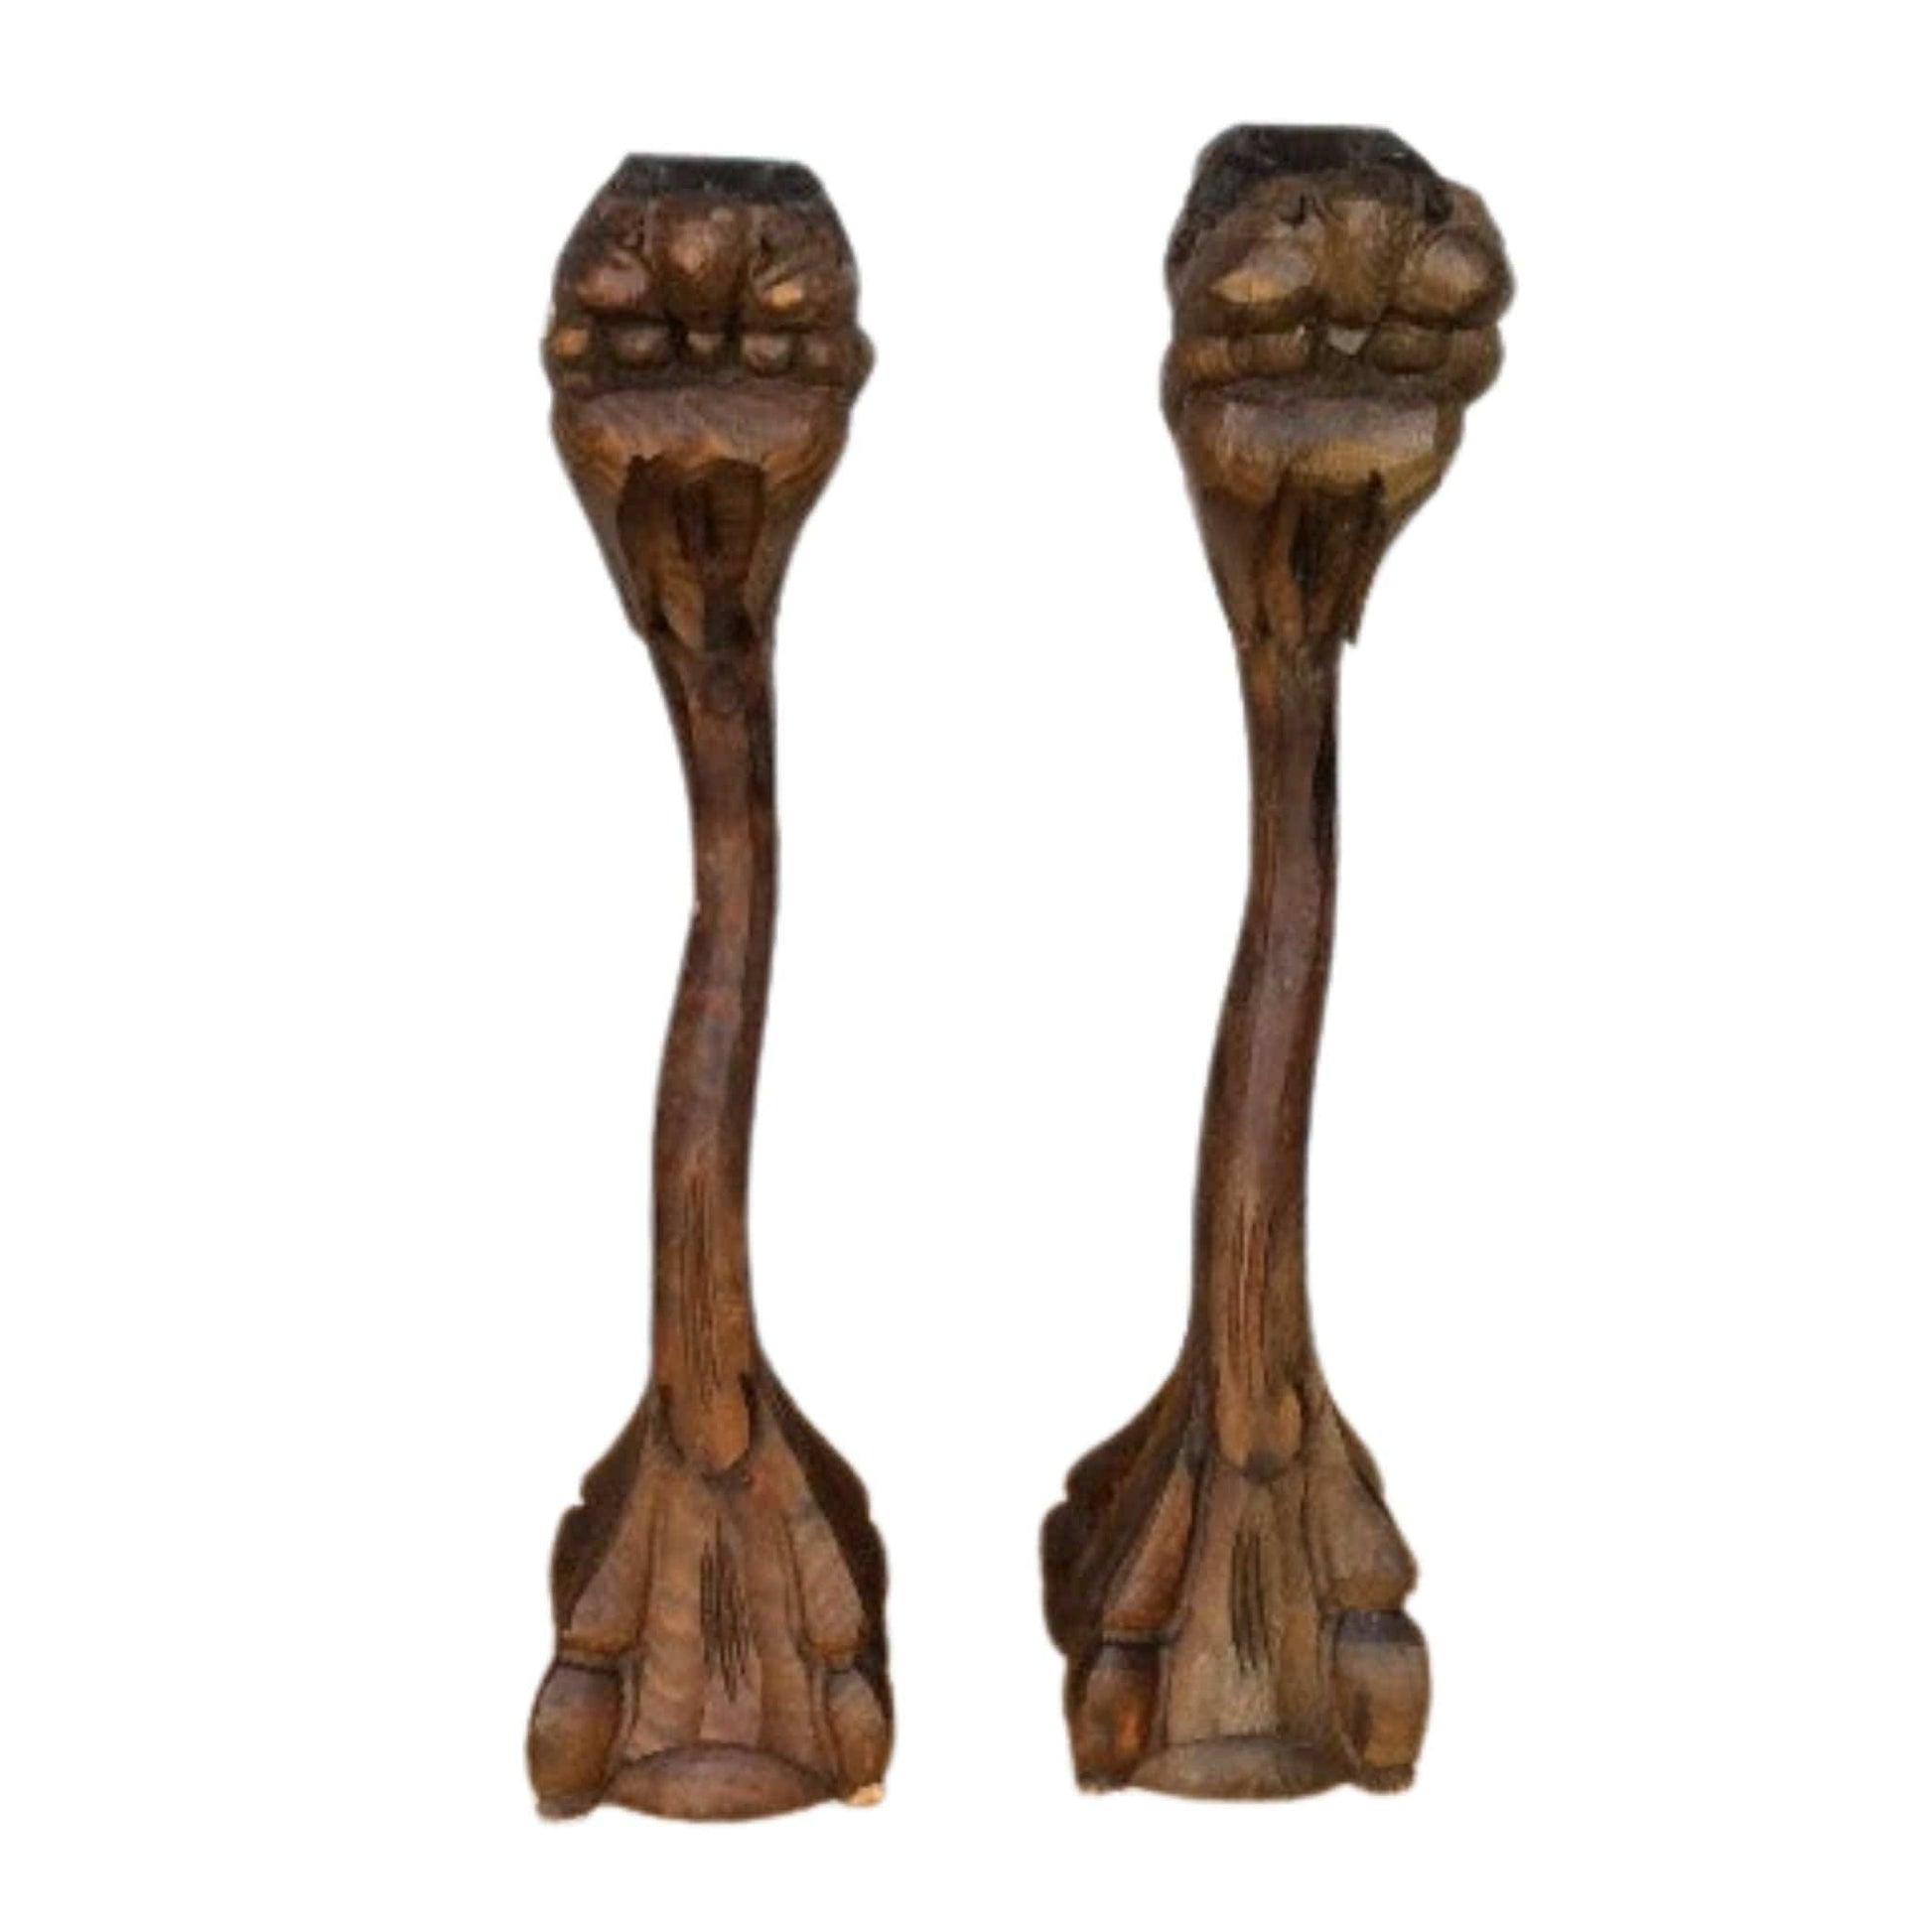 Claw Foot Candlesticks Brown / Wood / Vintage 1960s